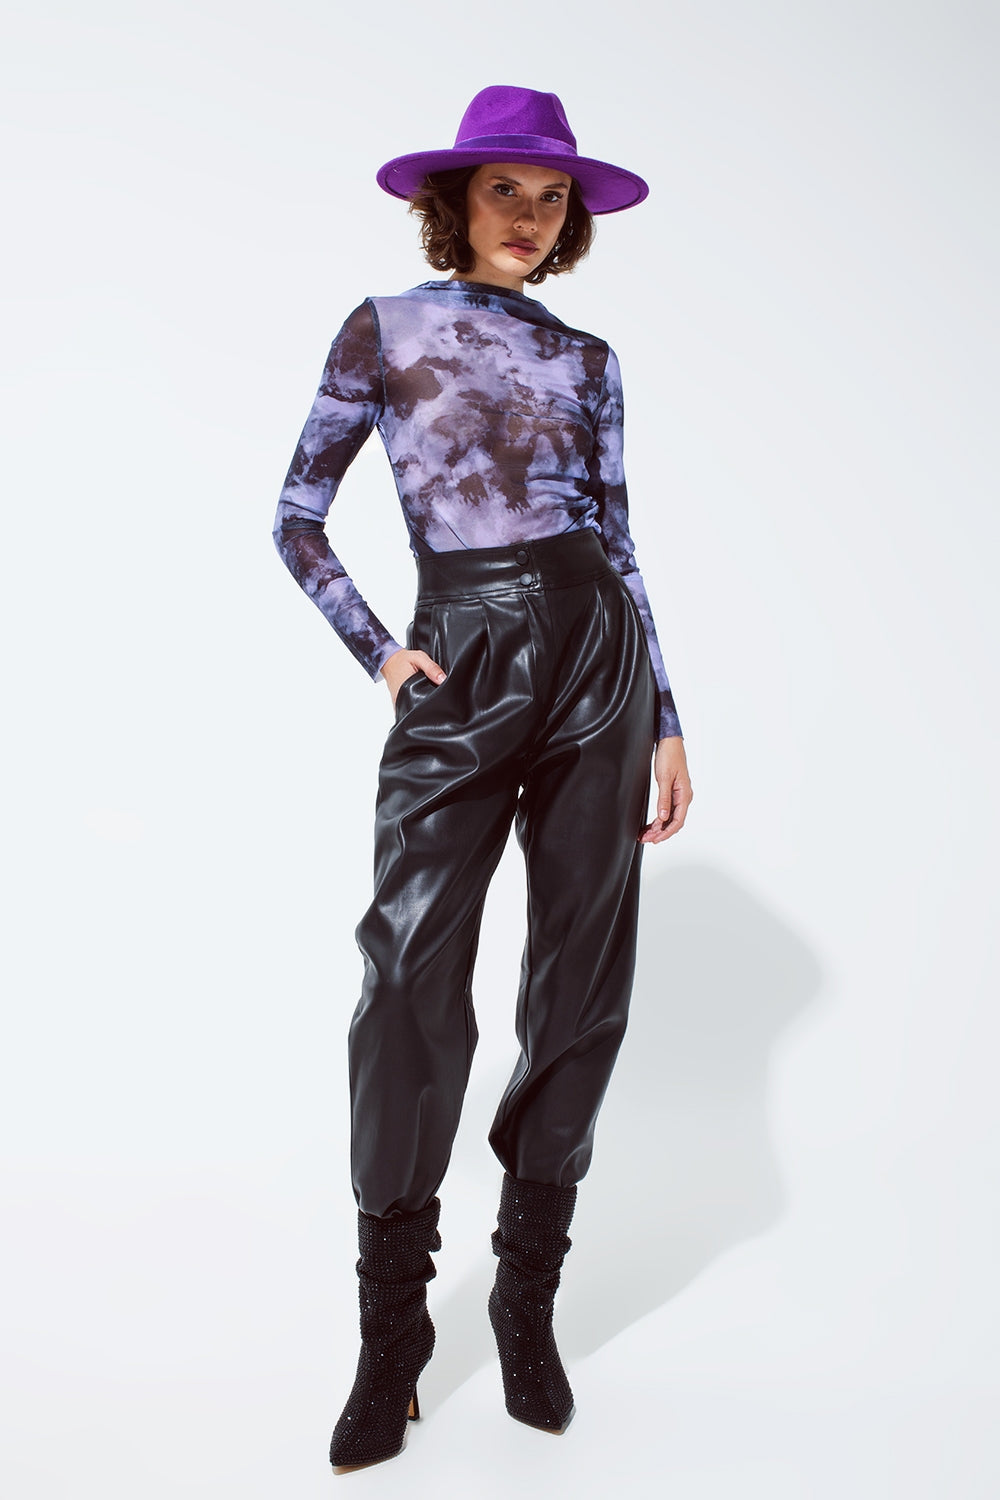 Mesh top cinched at the side with an abstract purple print